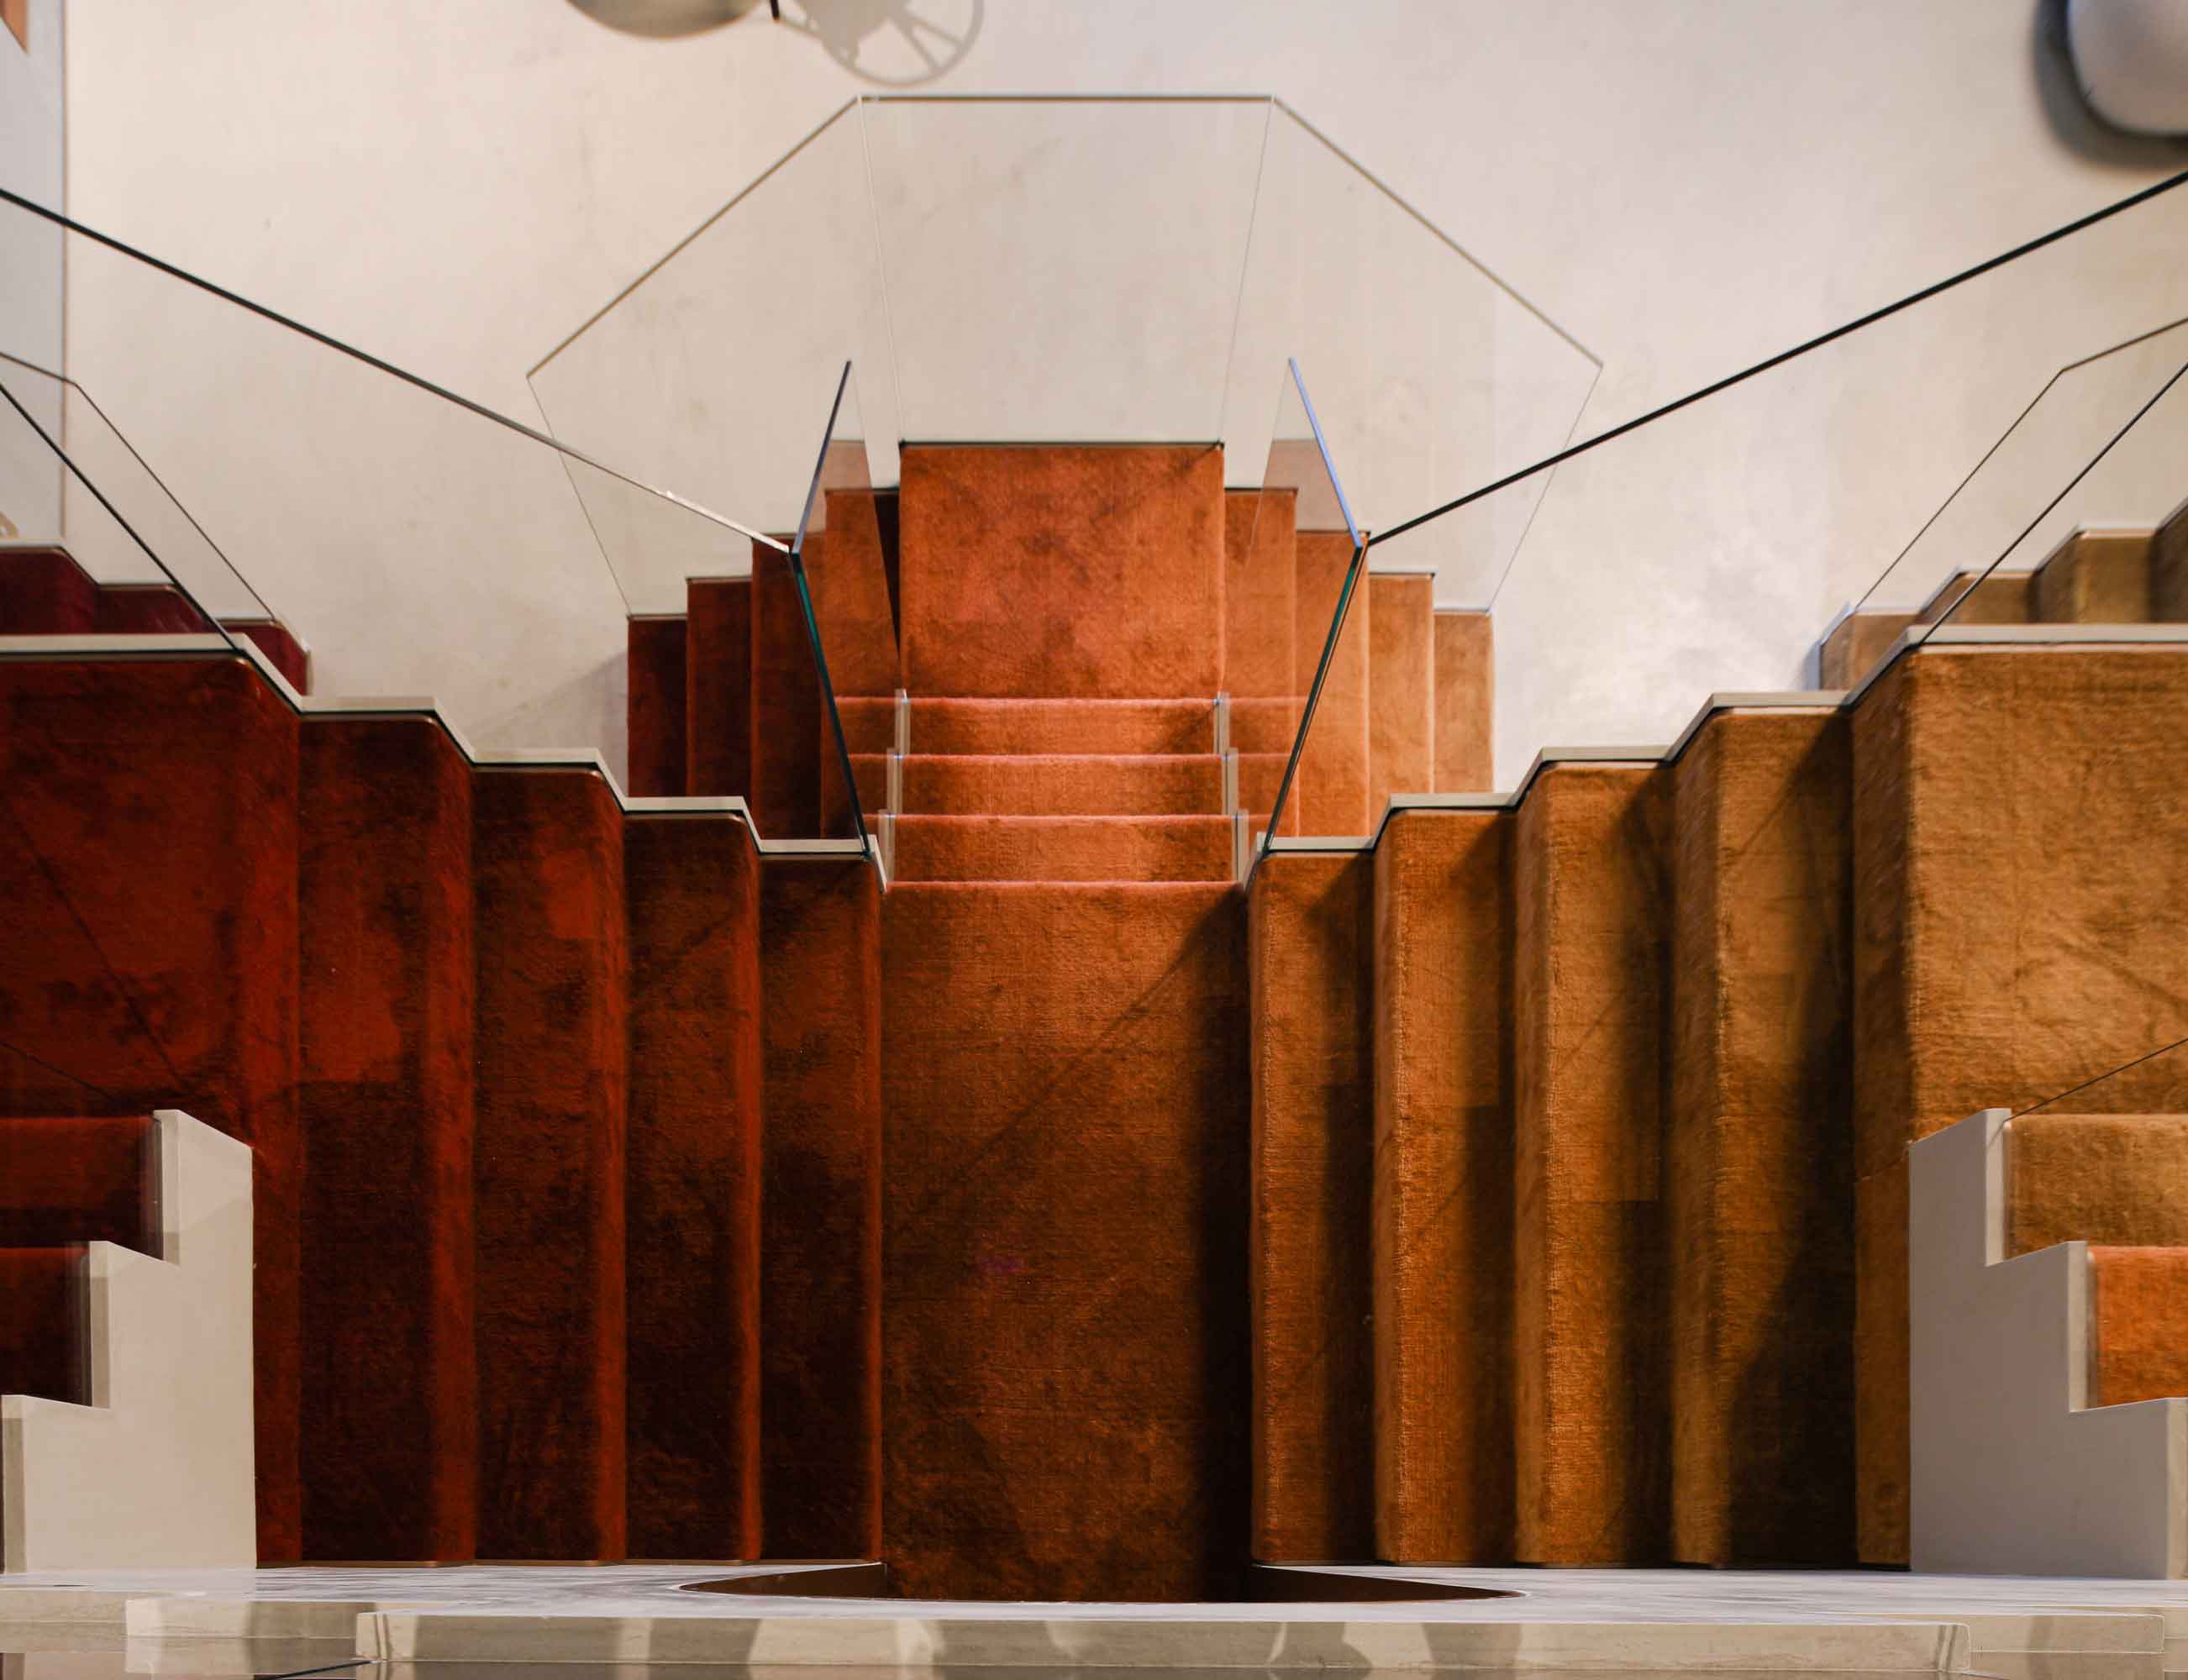 Top view of Stairs inside Jaipur rugs store